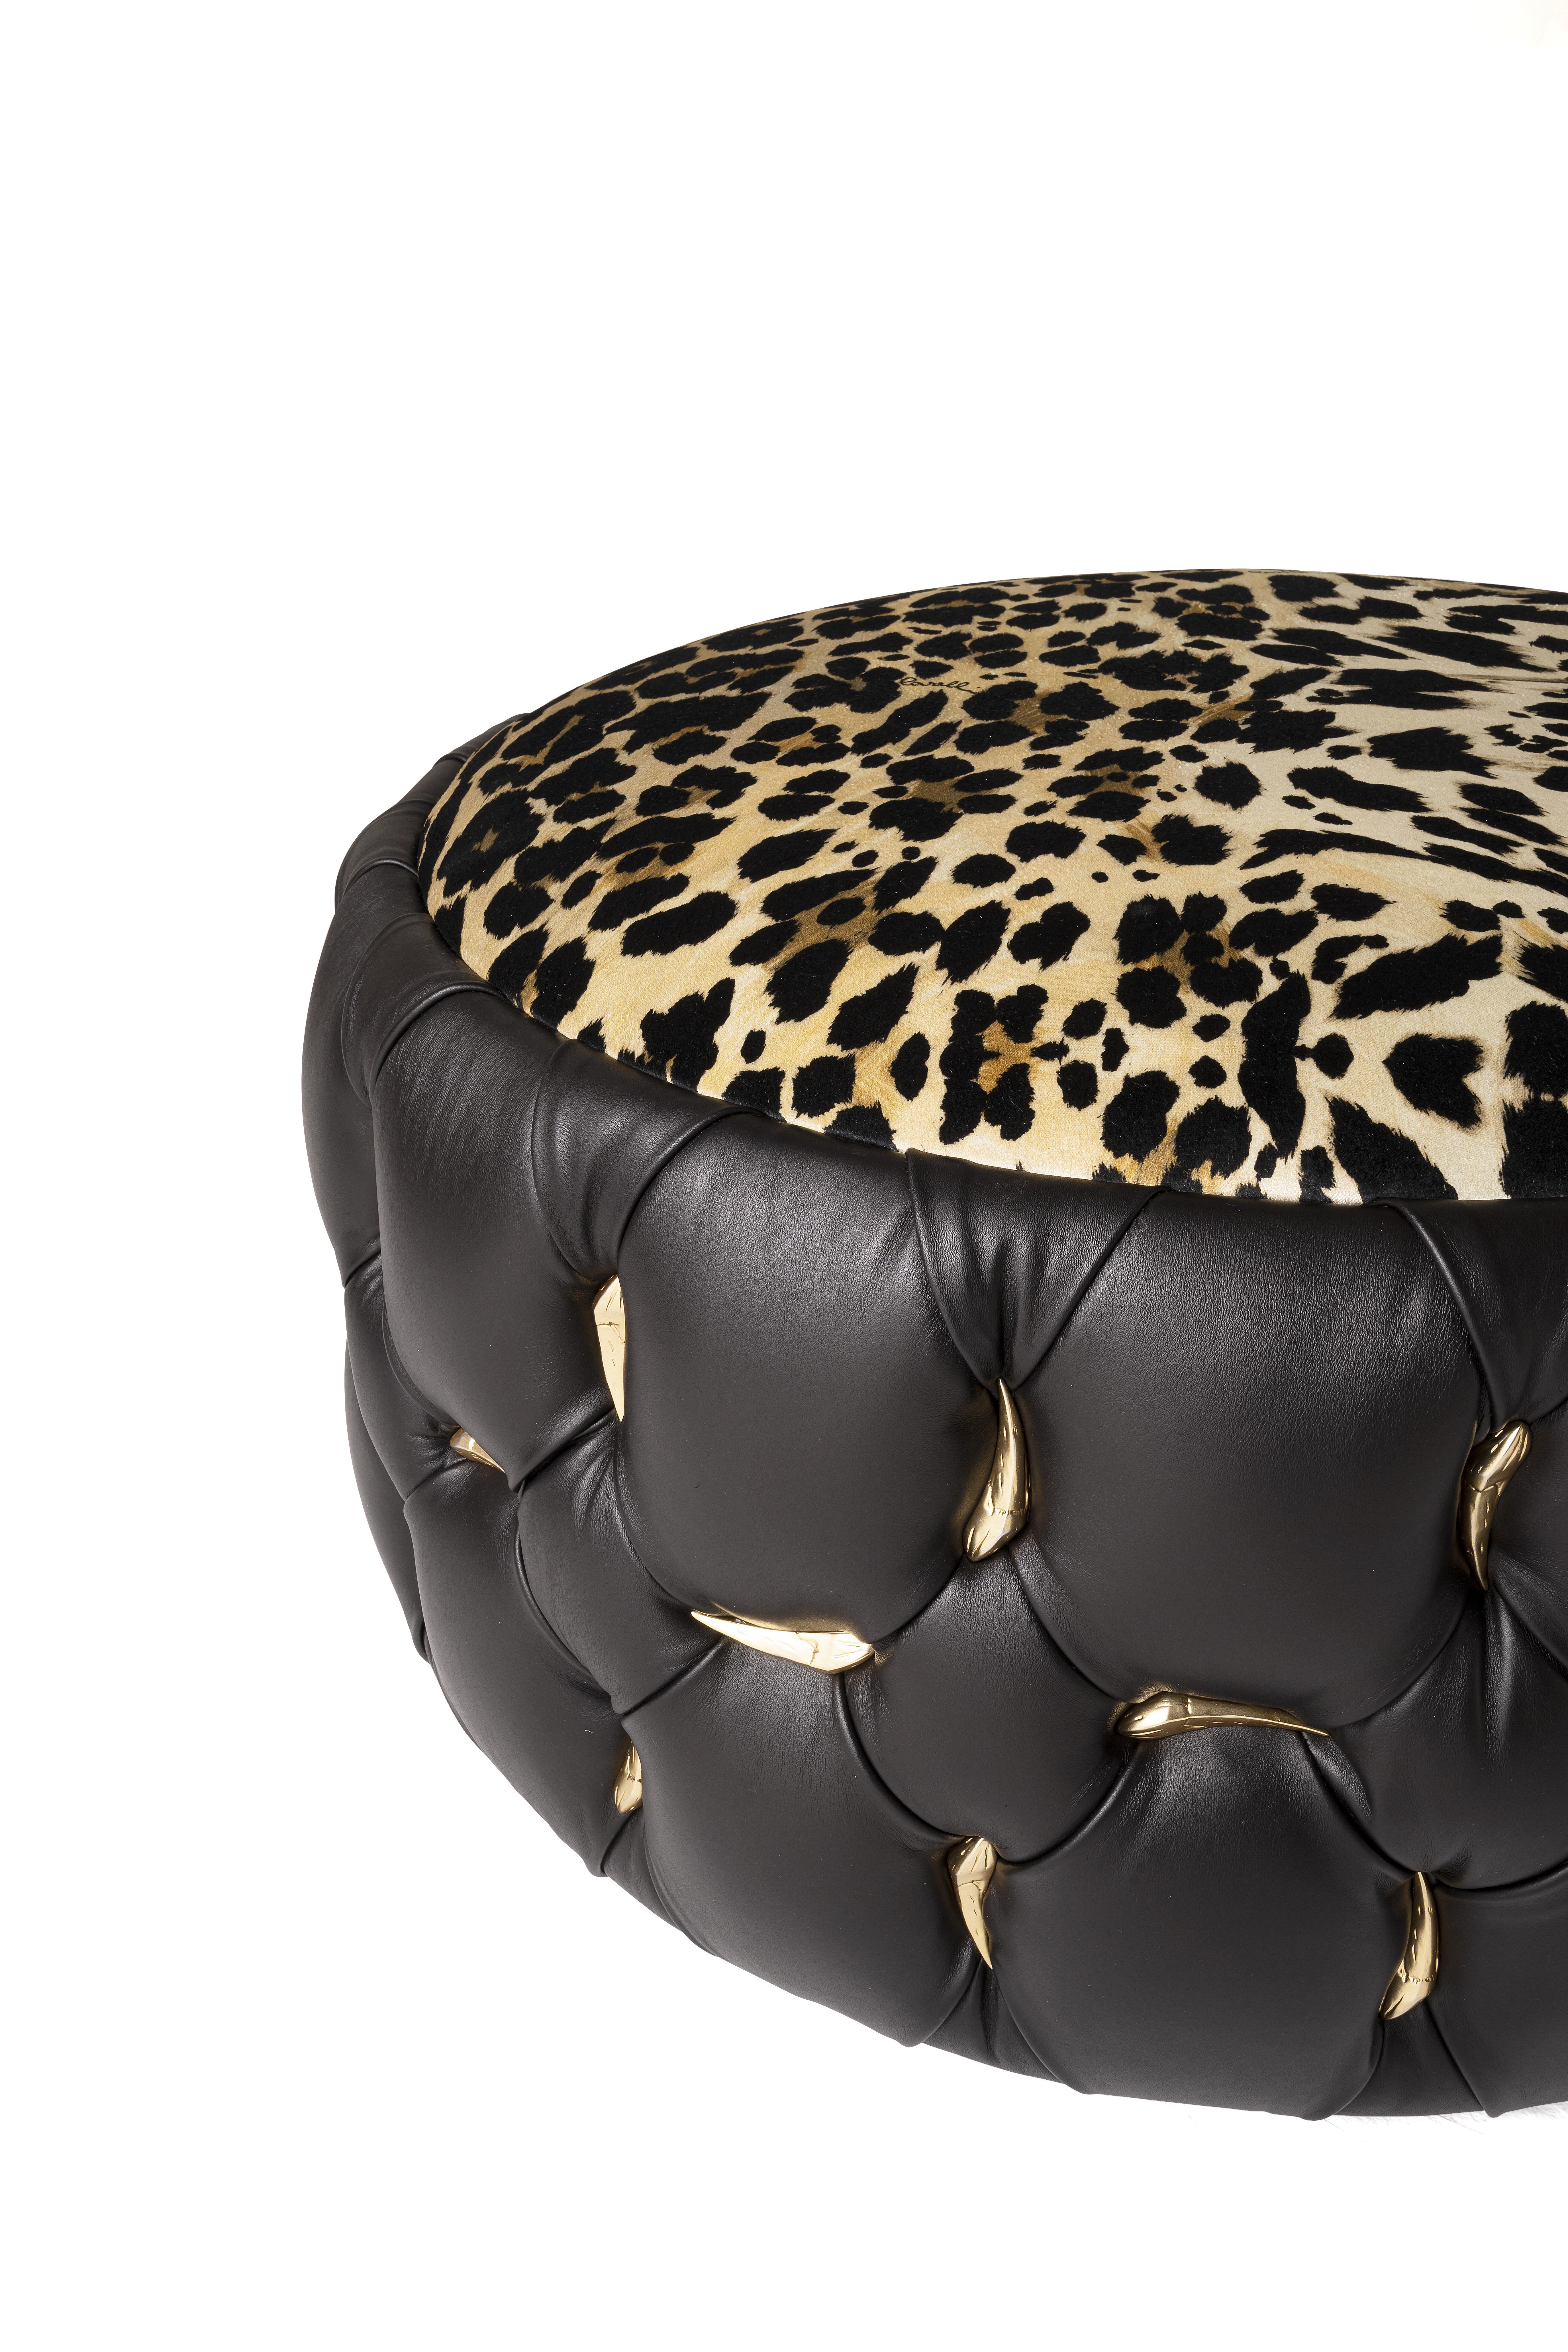 Modern 21st Century Wild Pouf in Fabric and Leather by Roberto Cavalli Home Interiors For Sale